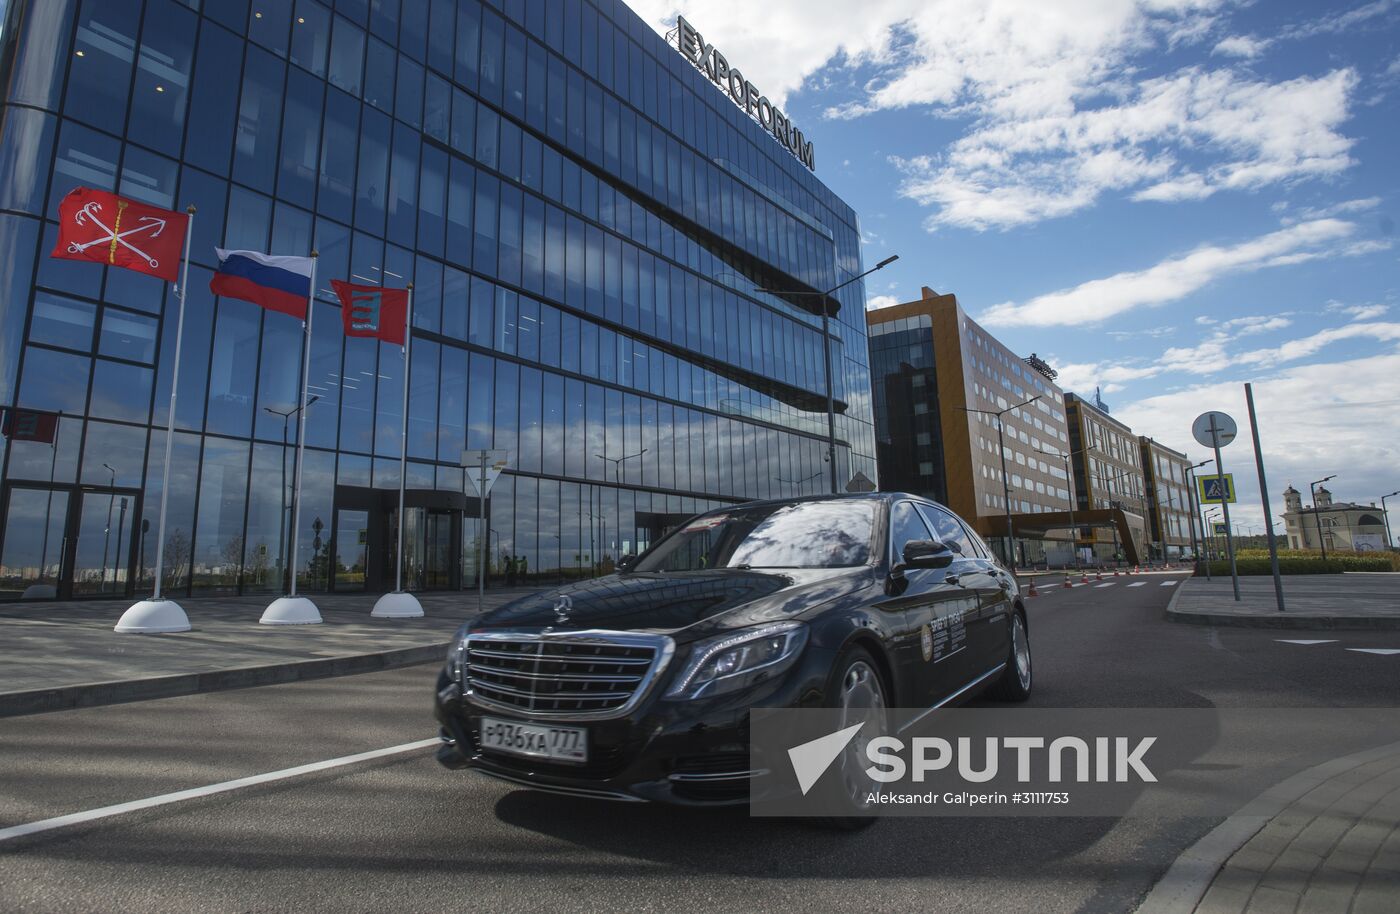 Drivers practice arrival at SPIEF 2017